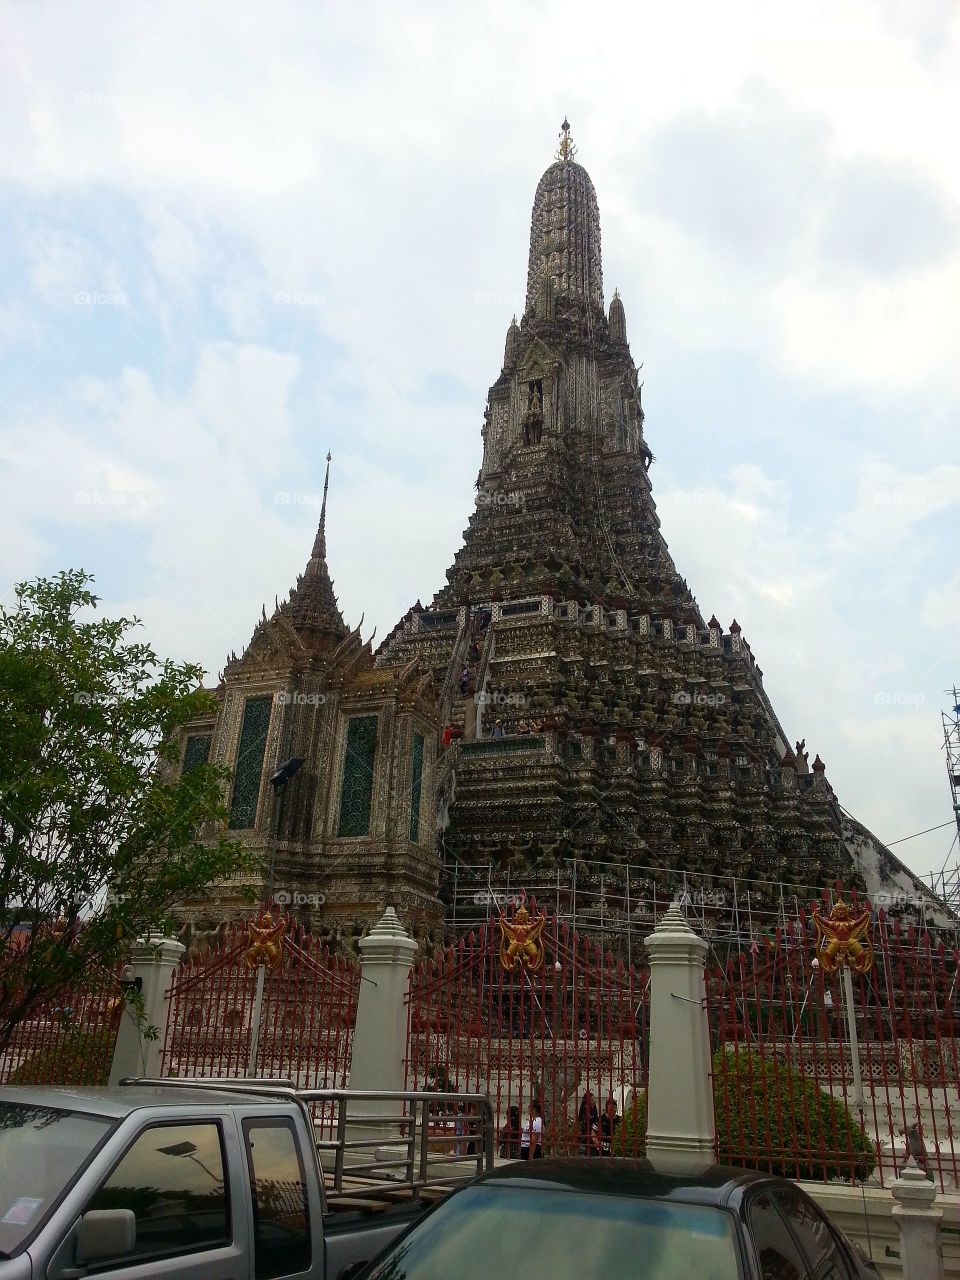 Great architecture @ temple in Bangkok, Thailand